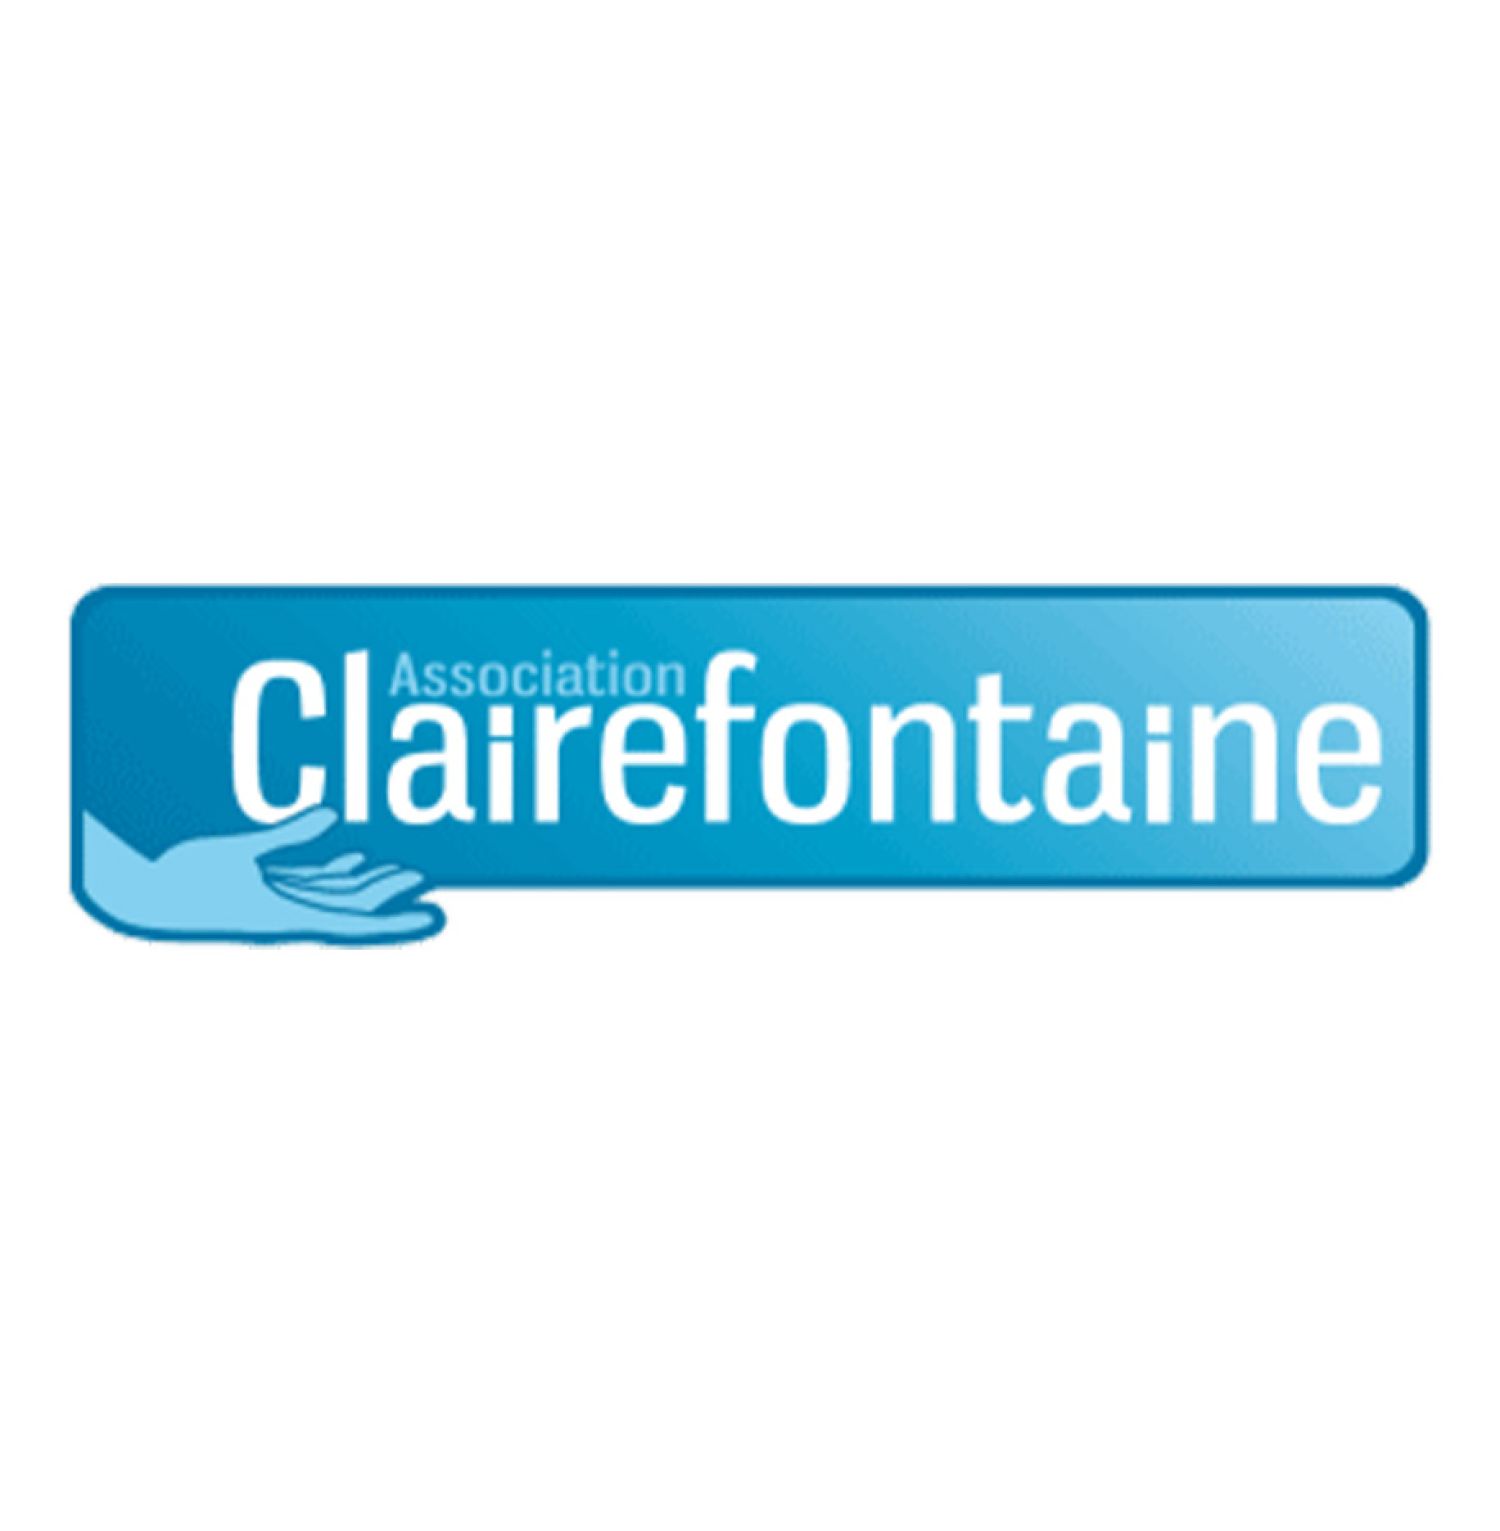 Association Clairefontaine